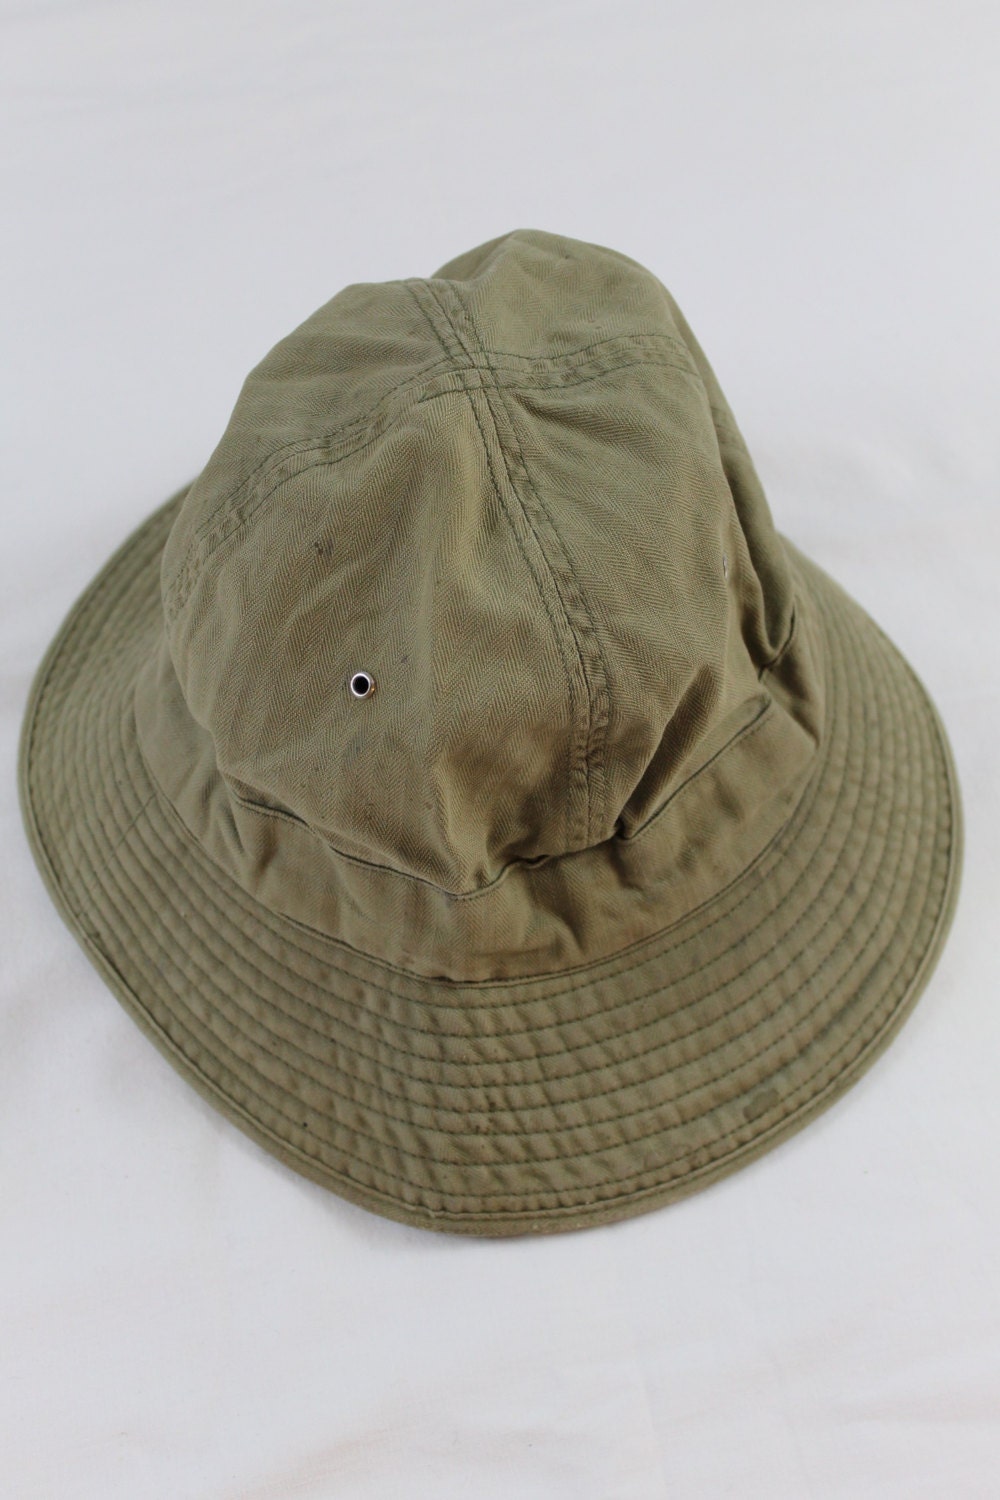 United States Army Vintage WWII OD HBT Daisy Mae Hat/ Boonie Hat Size 7 ...